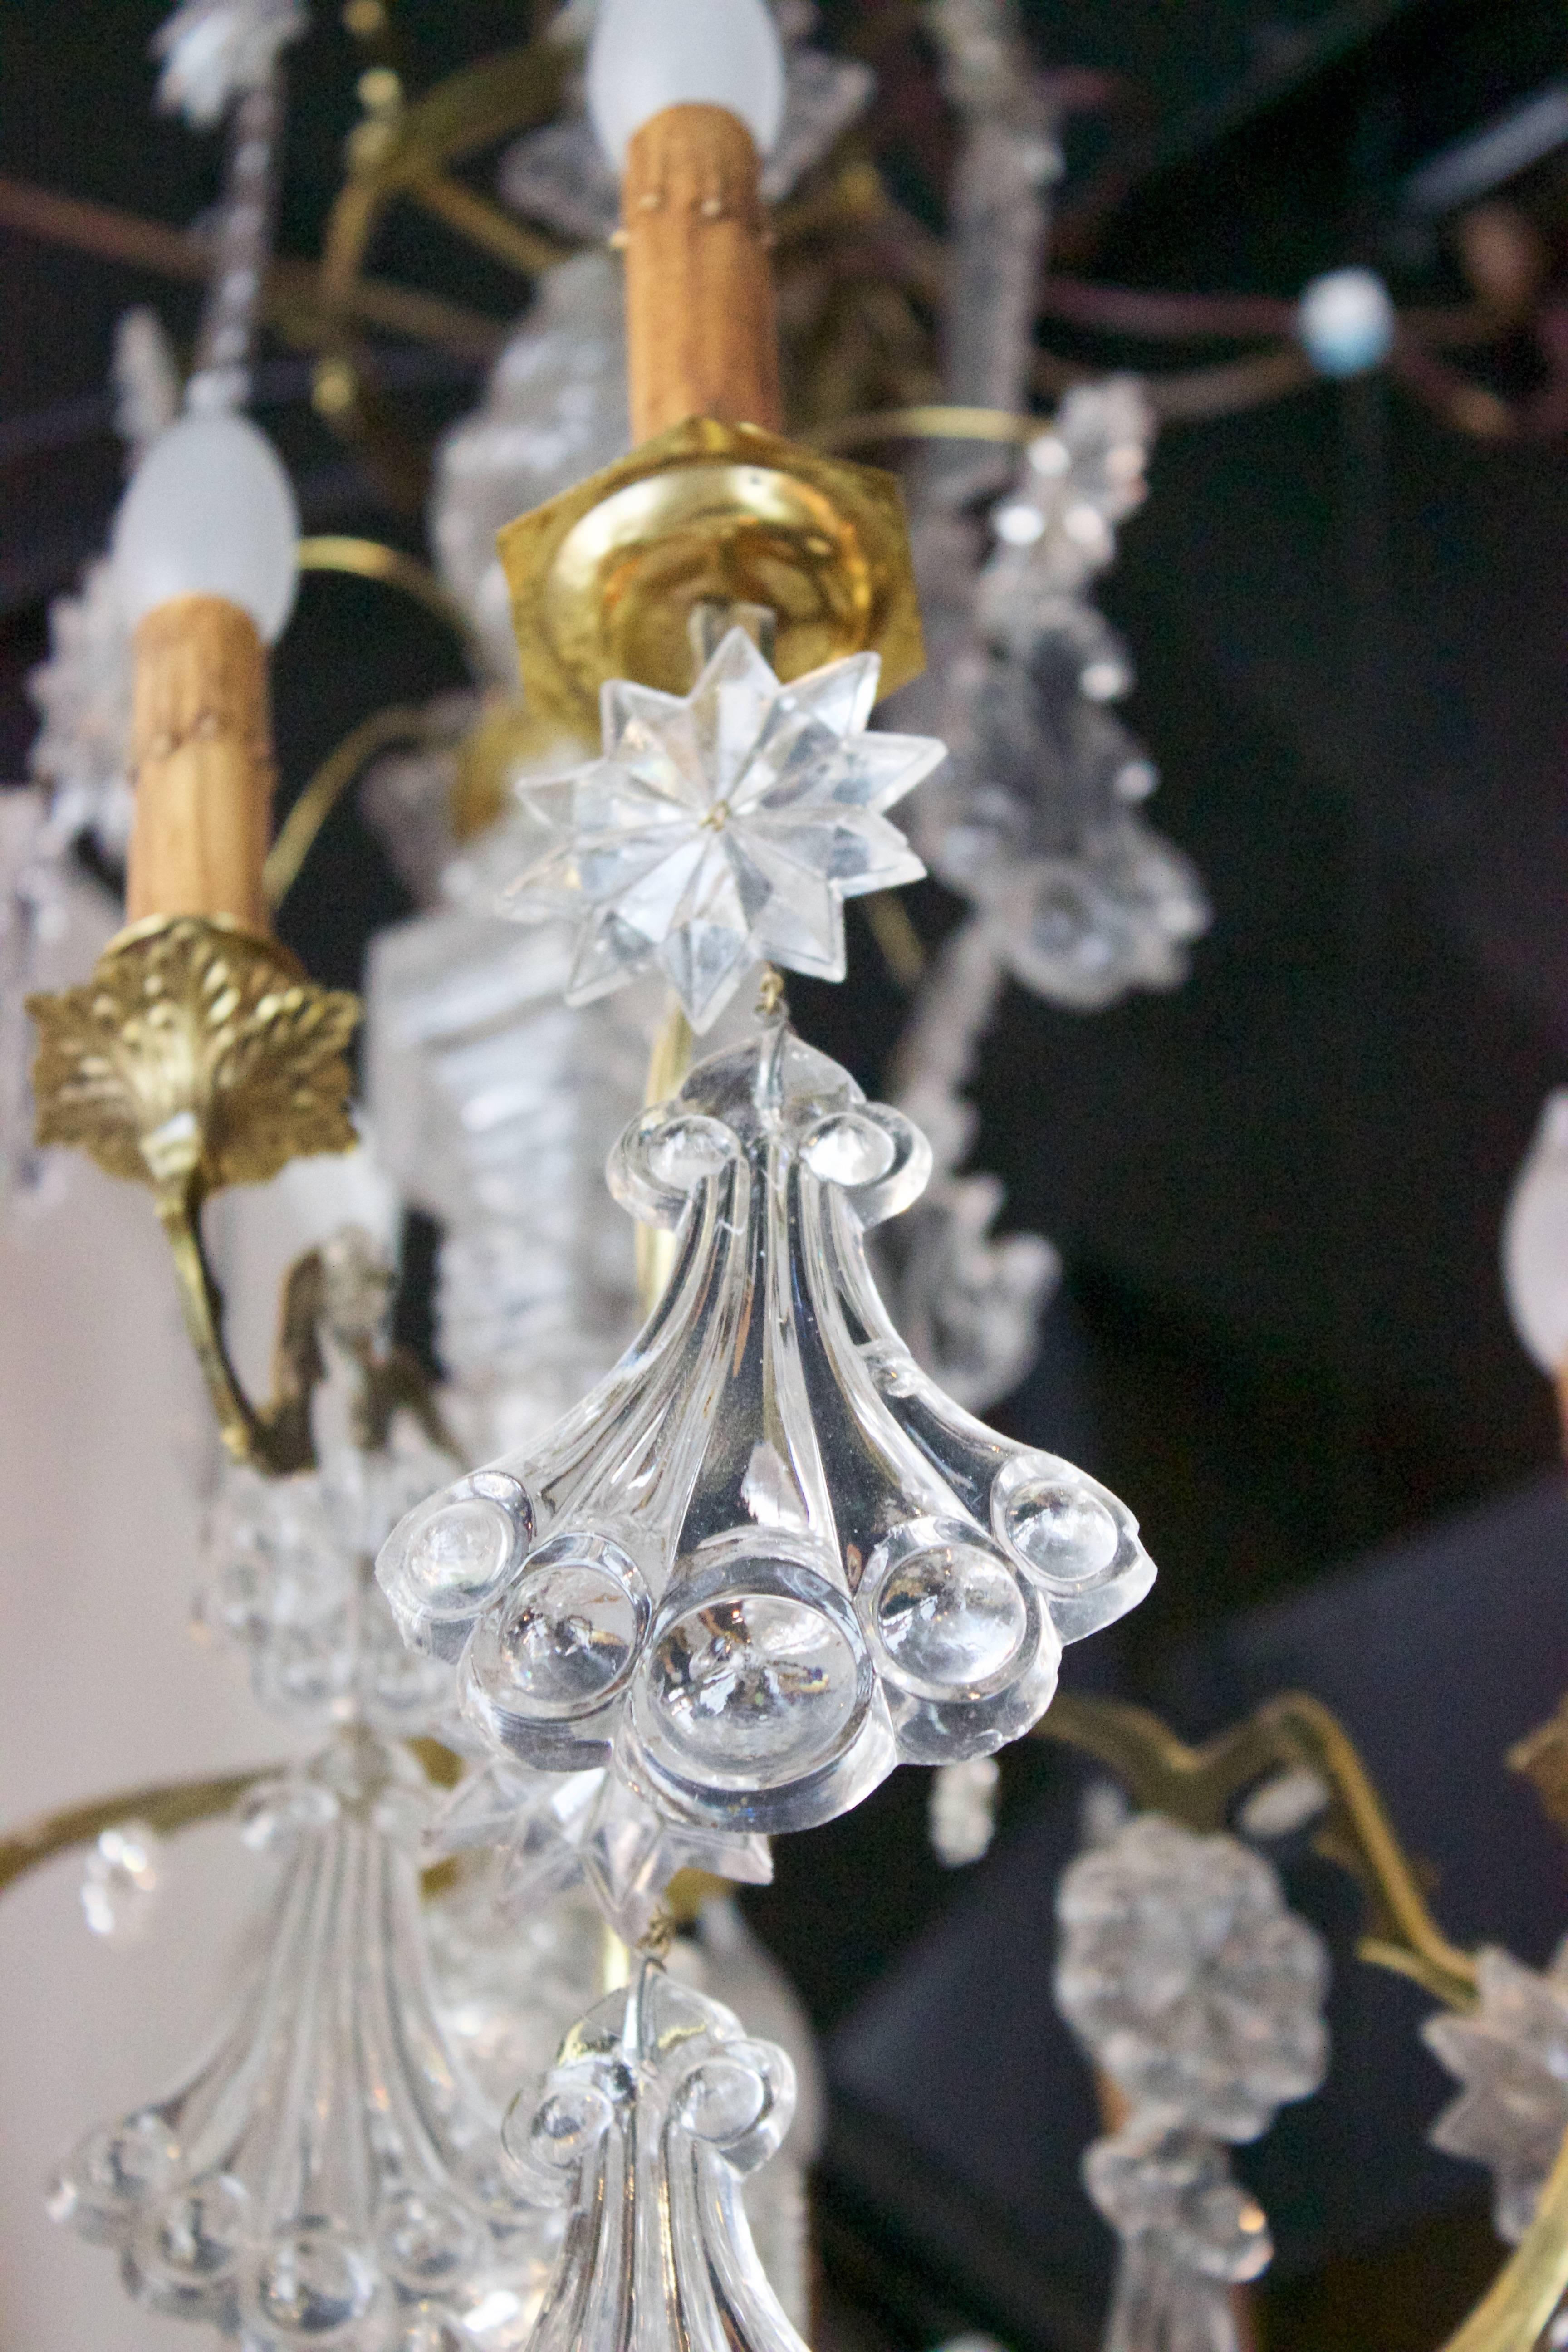 This fabulous Louis XV style chandelier deploys around a bronze metal structure made of stems and forming a central 